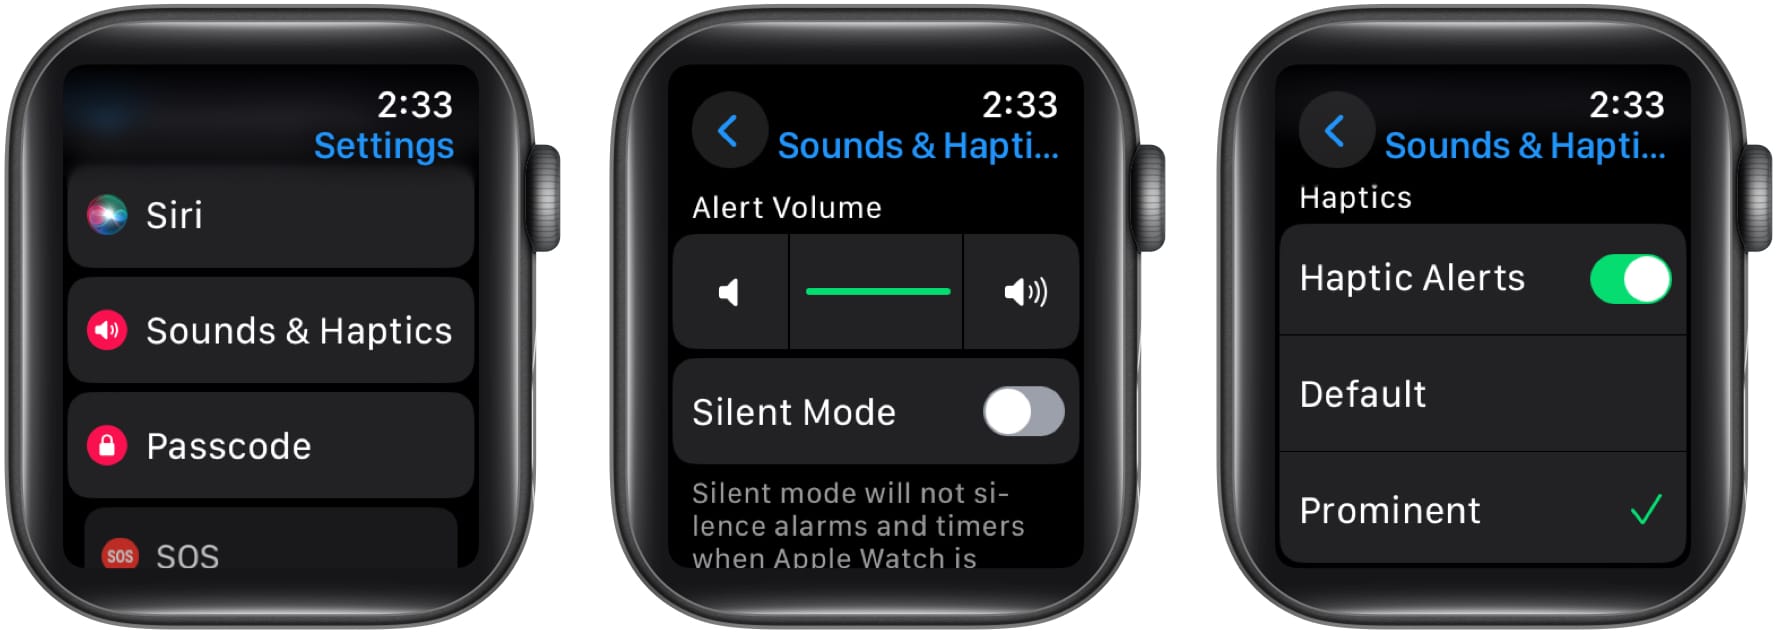 Turn off Silent Mode to turn on Haptic Alerts on Apple Watch